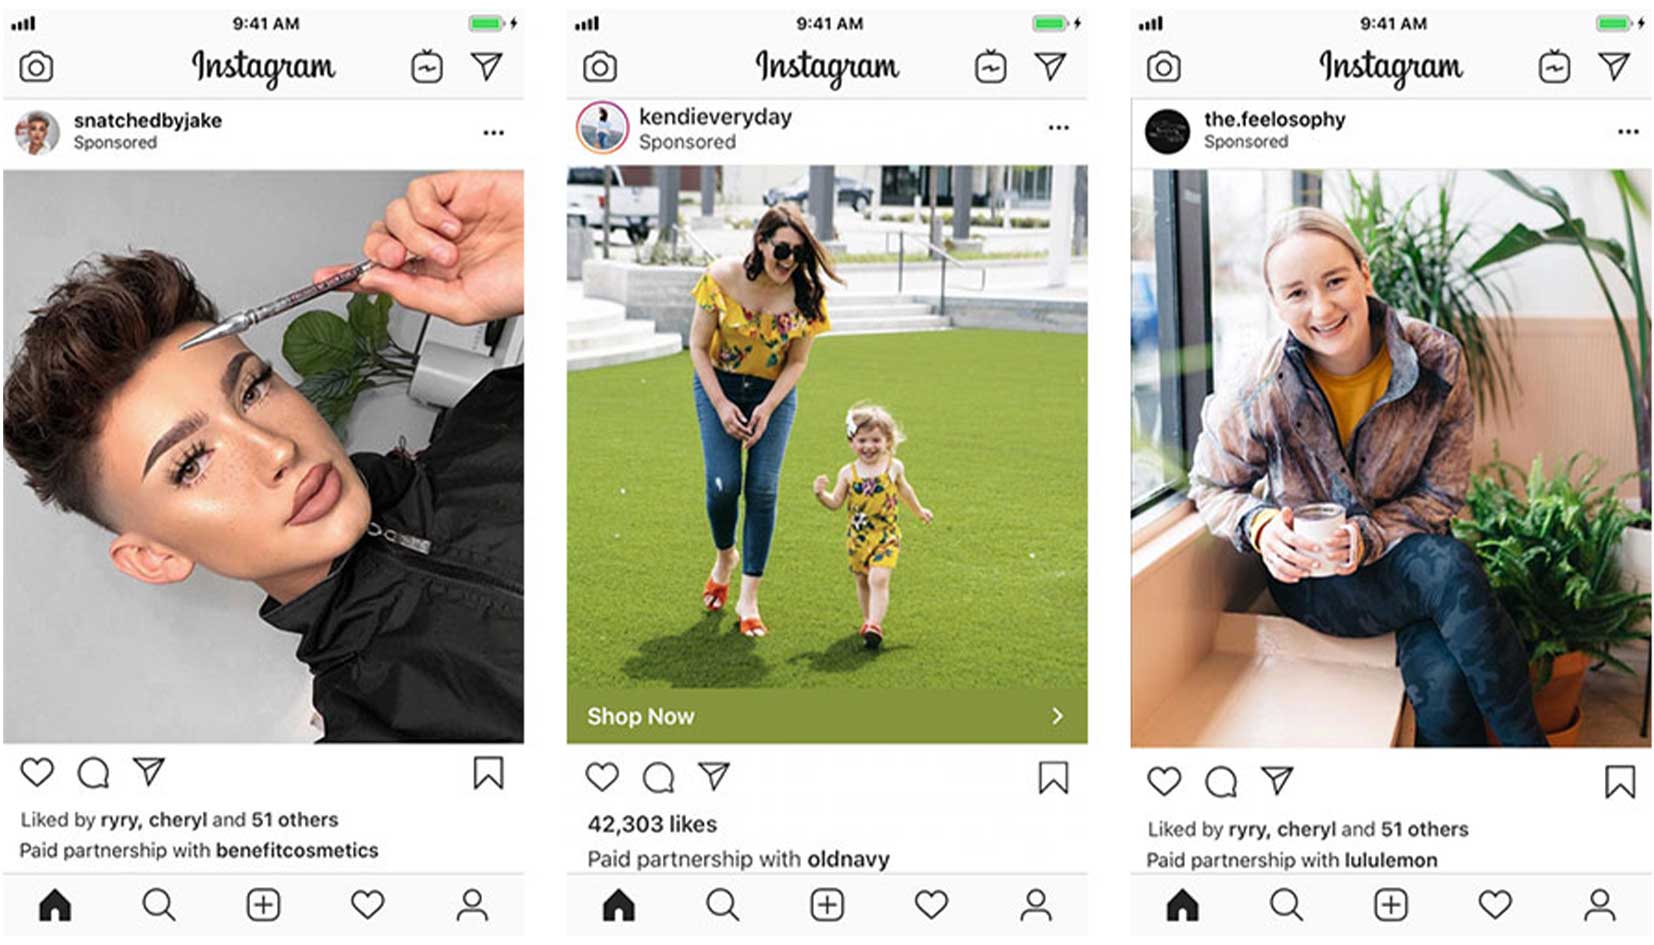 how-can-influencers-benefit-from-instagrams-branded-content-ad-tool